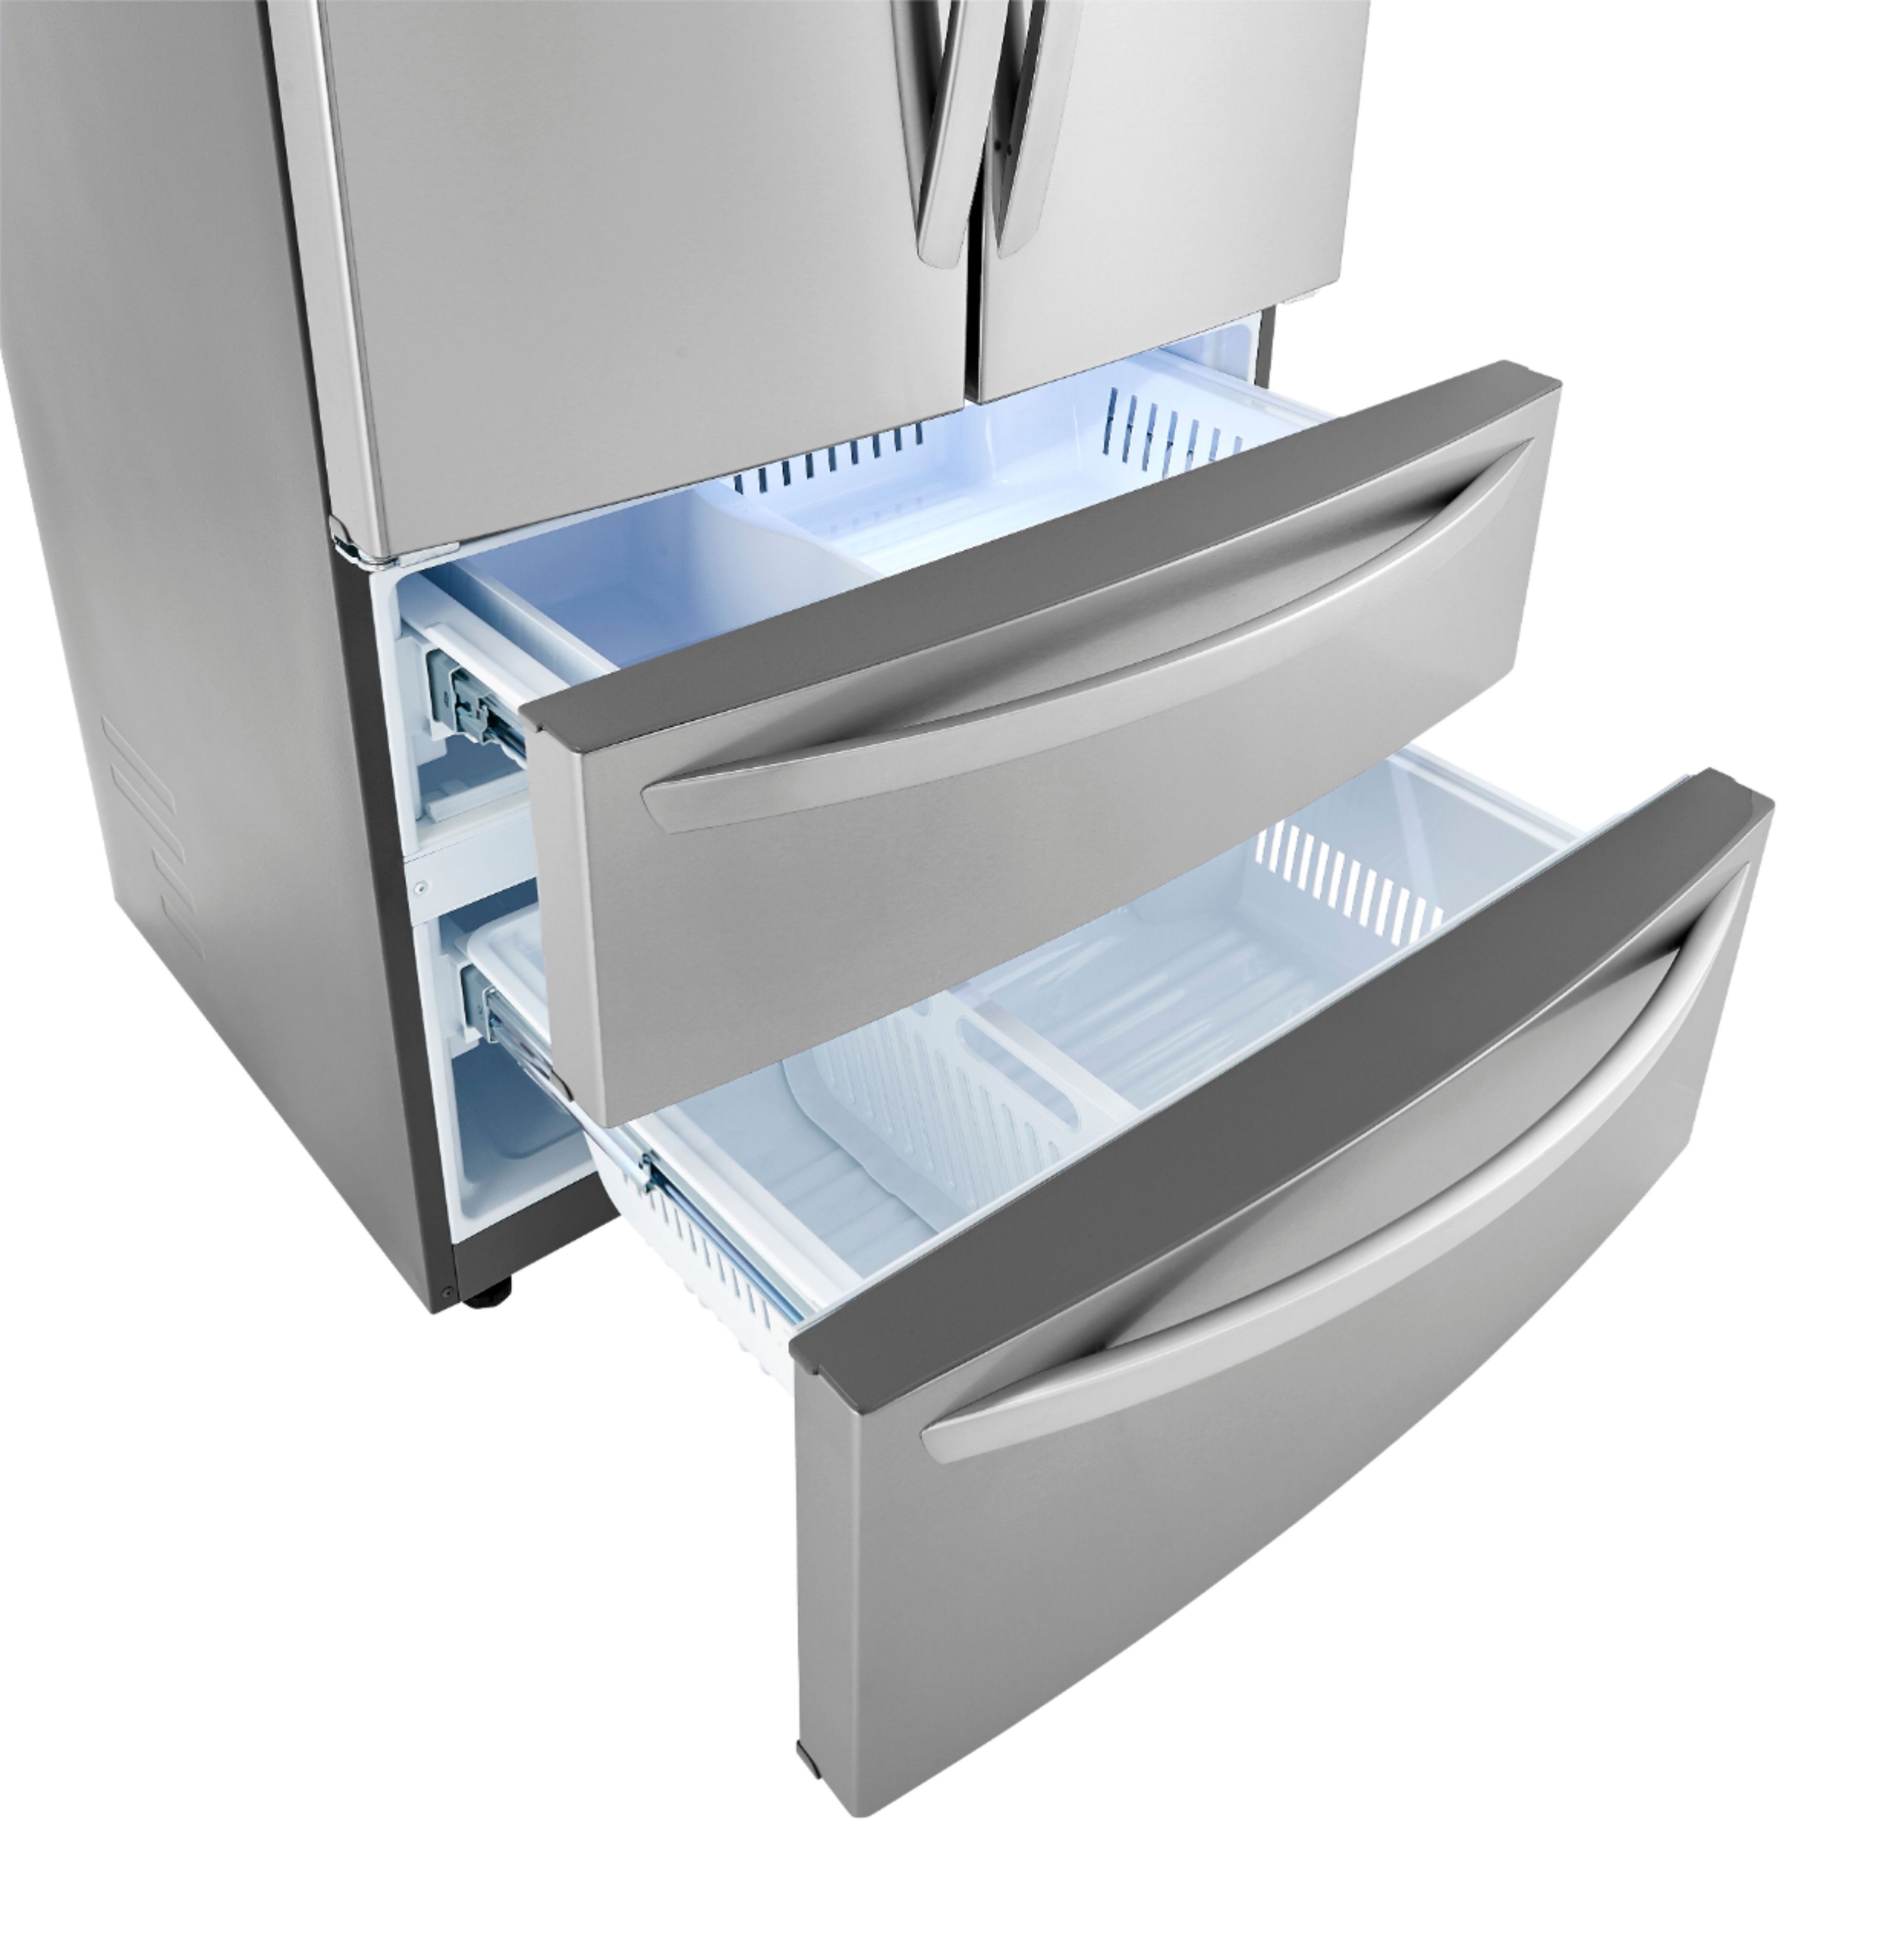 16+ Lg freezer pull out drawer stuck ideas in 2021 